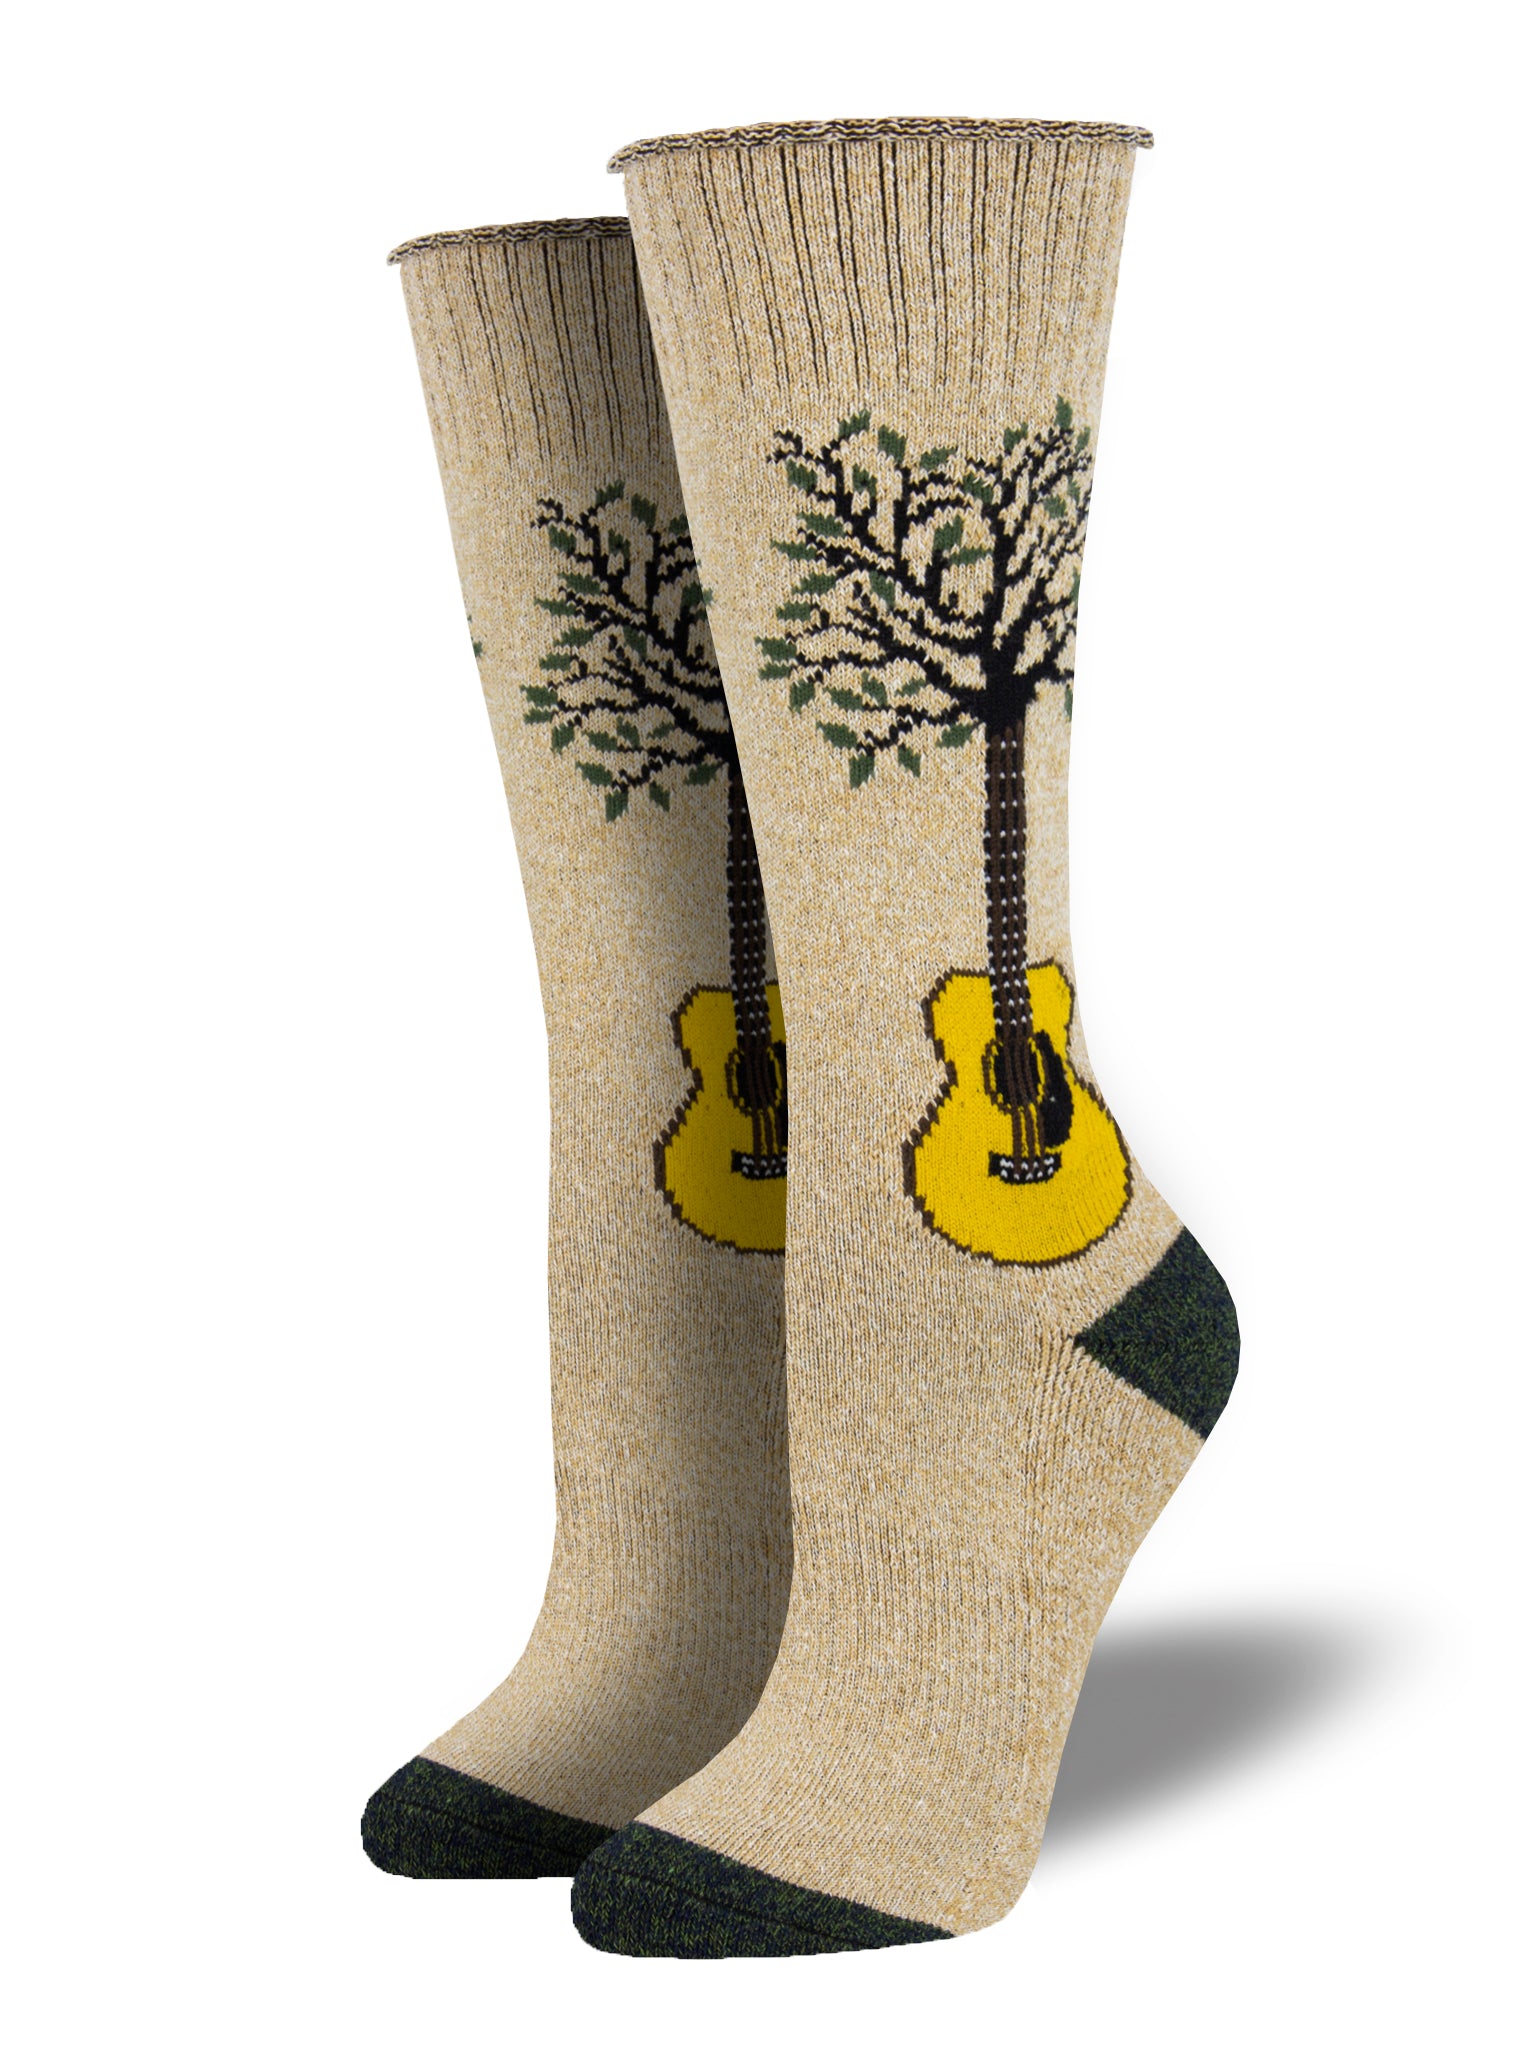 Crew socks feature a design of a guitar-tree and are made of recycled materials.